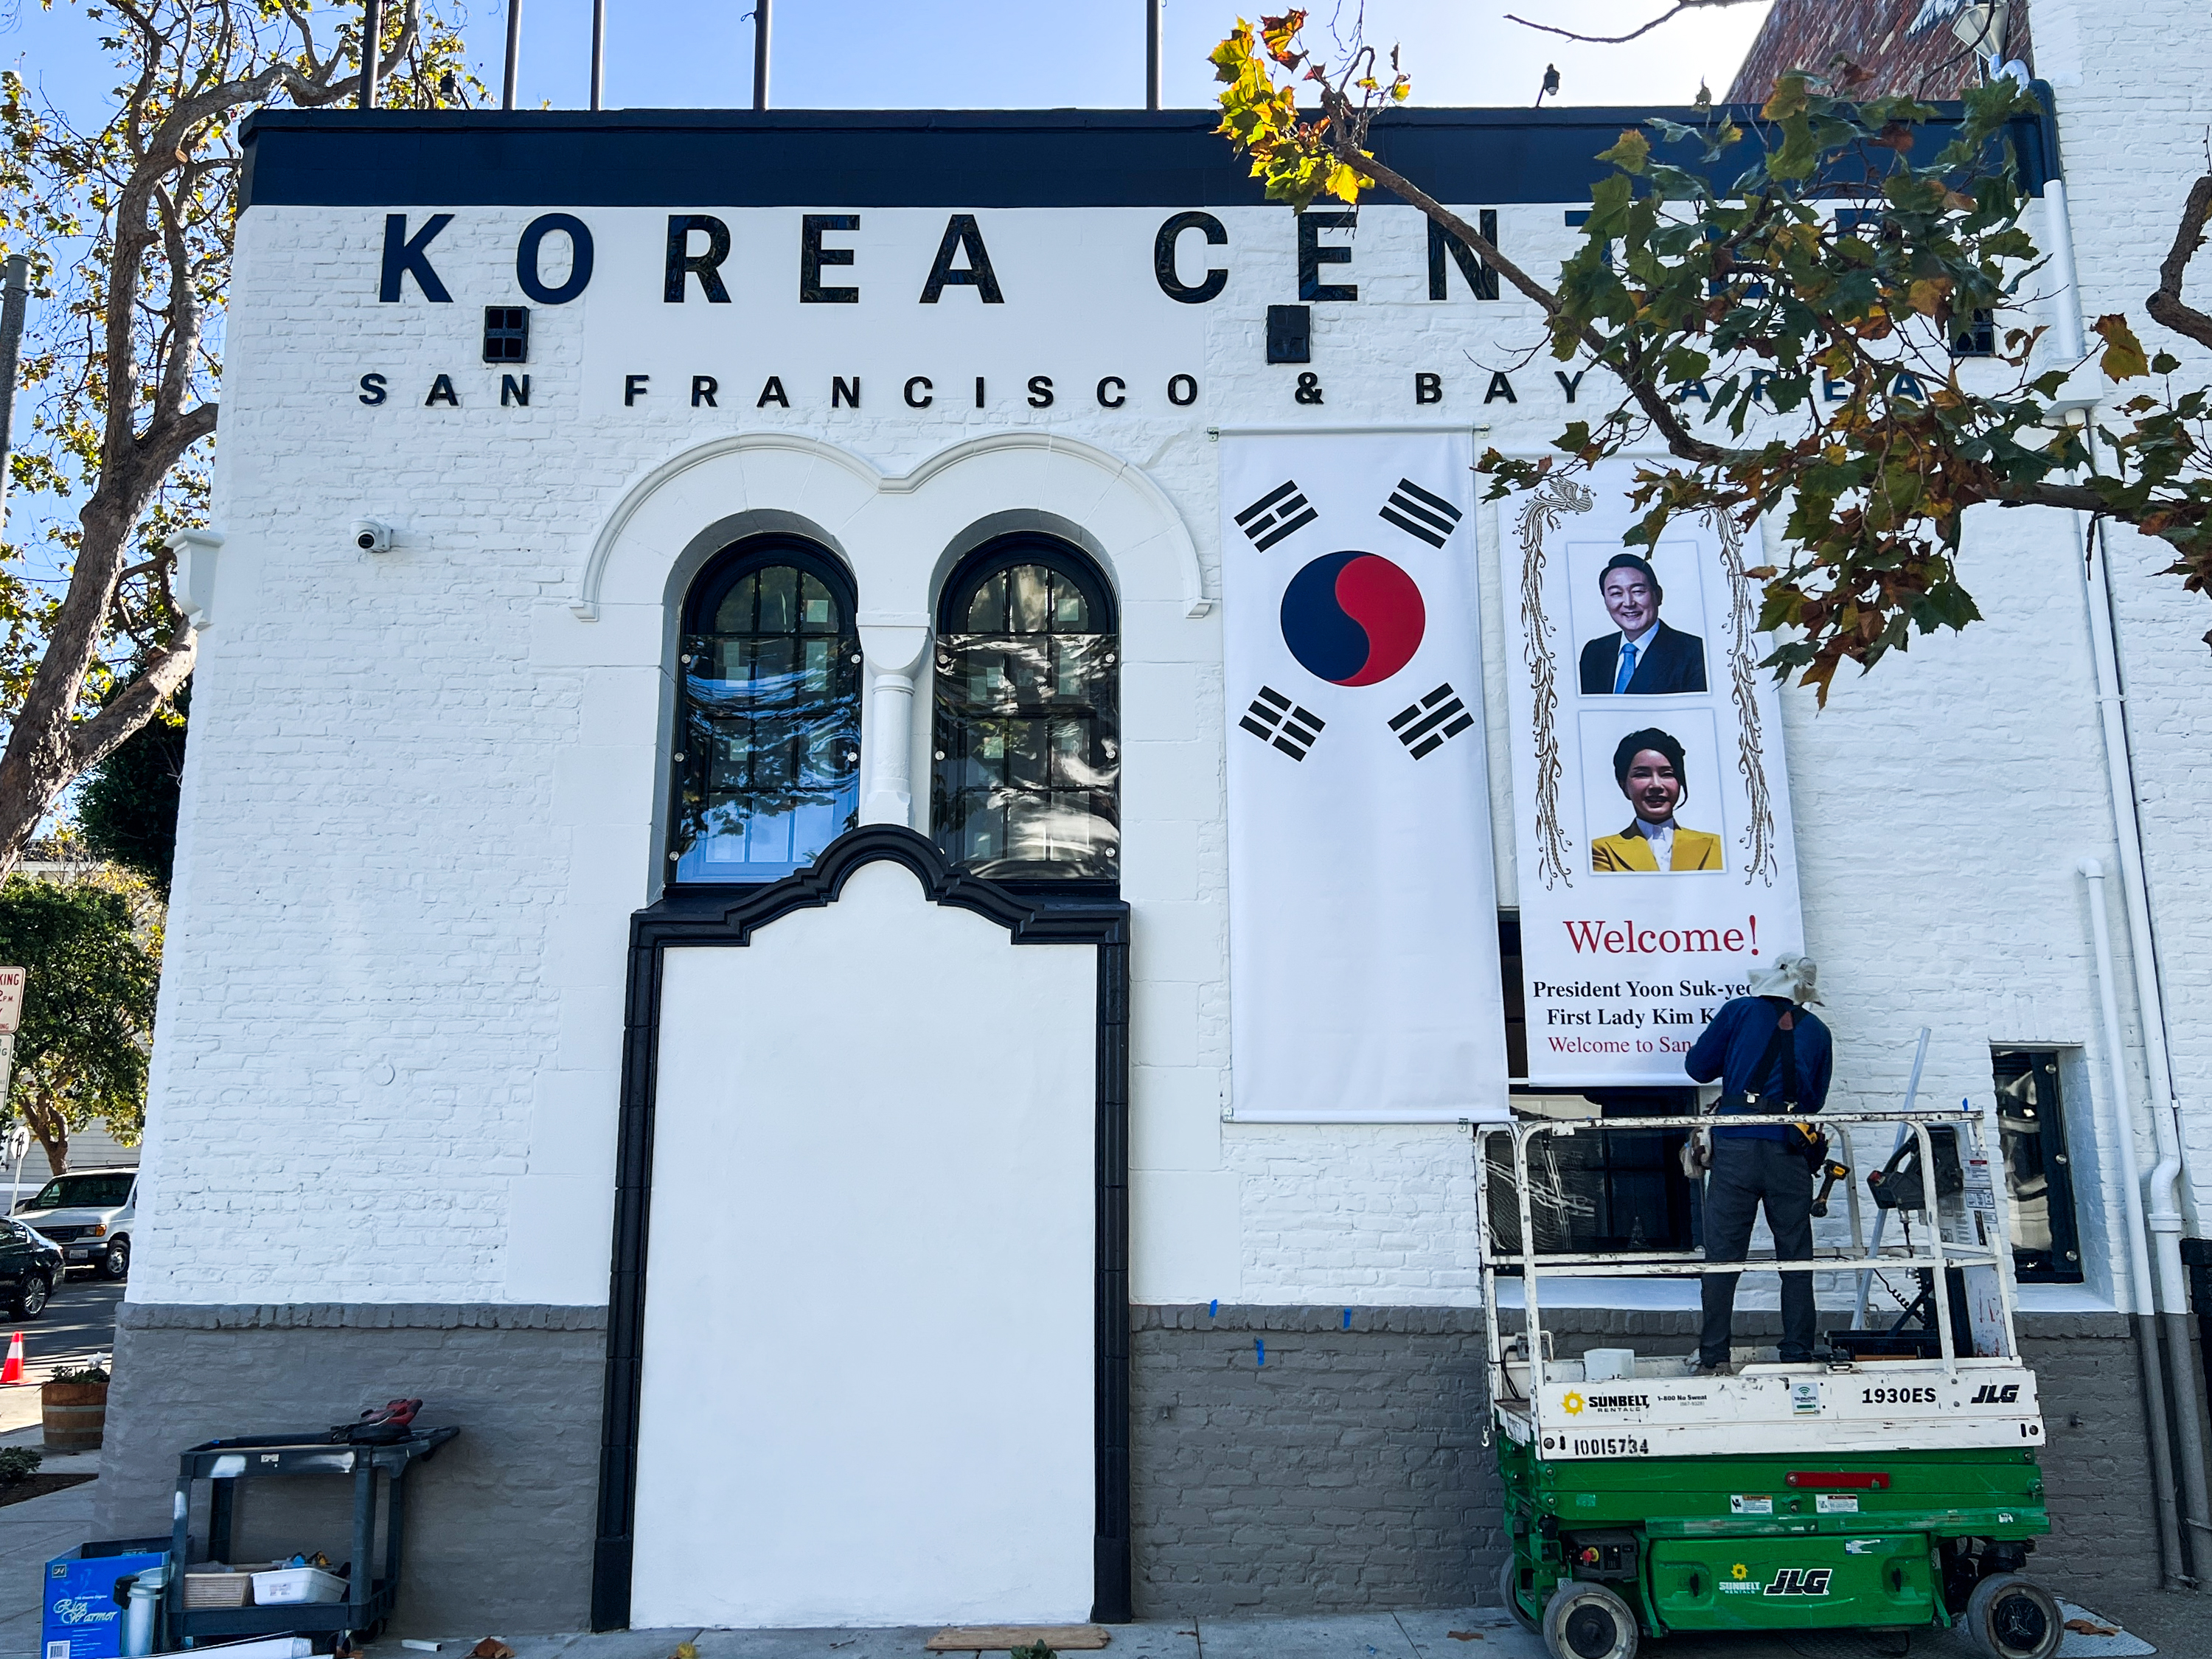 A worker on a scaffold hangs a banner welcoming President/First Lady of Korea, Kim Keon-hee on the building of the Korea Center in San Francisco.